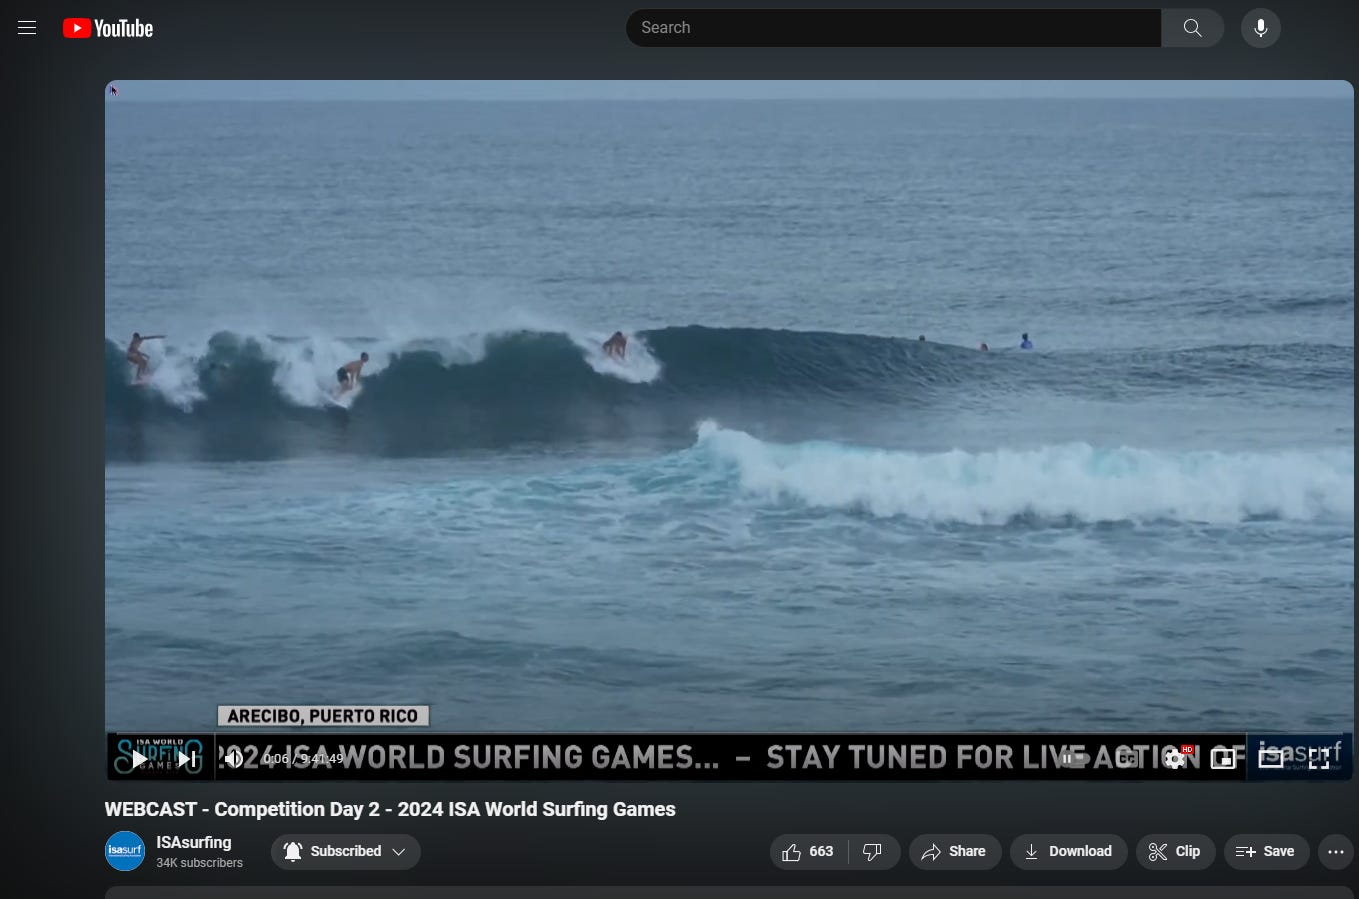 Screenshot of ISA’s YouTube Video for Day 2 of 2024 World Surfing Games